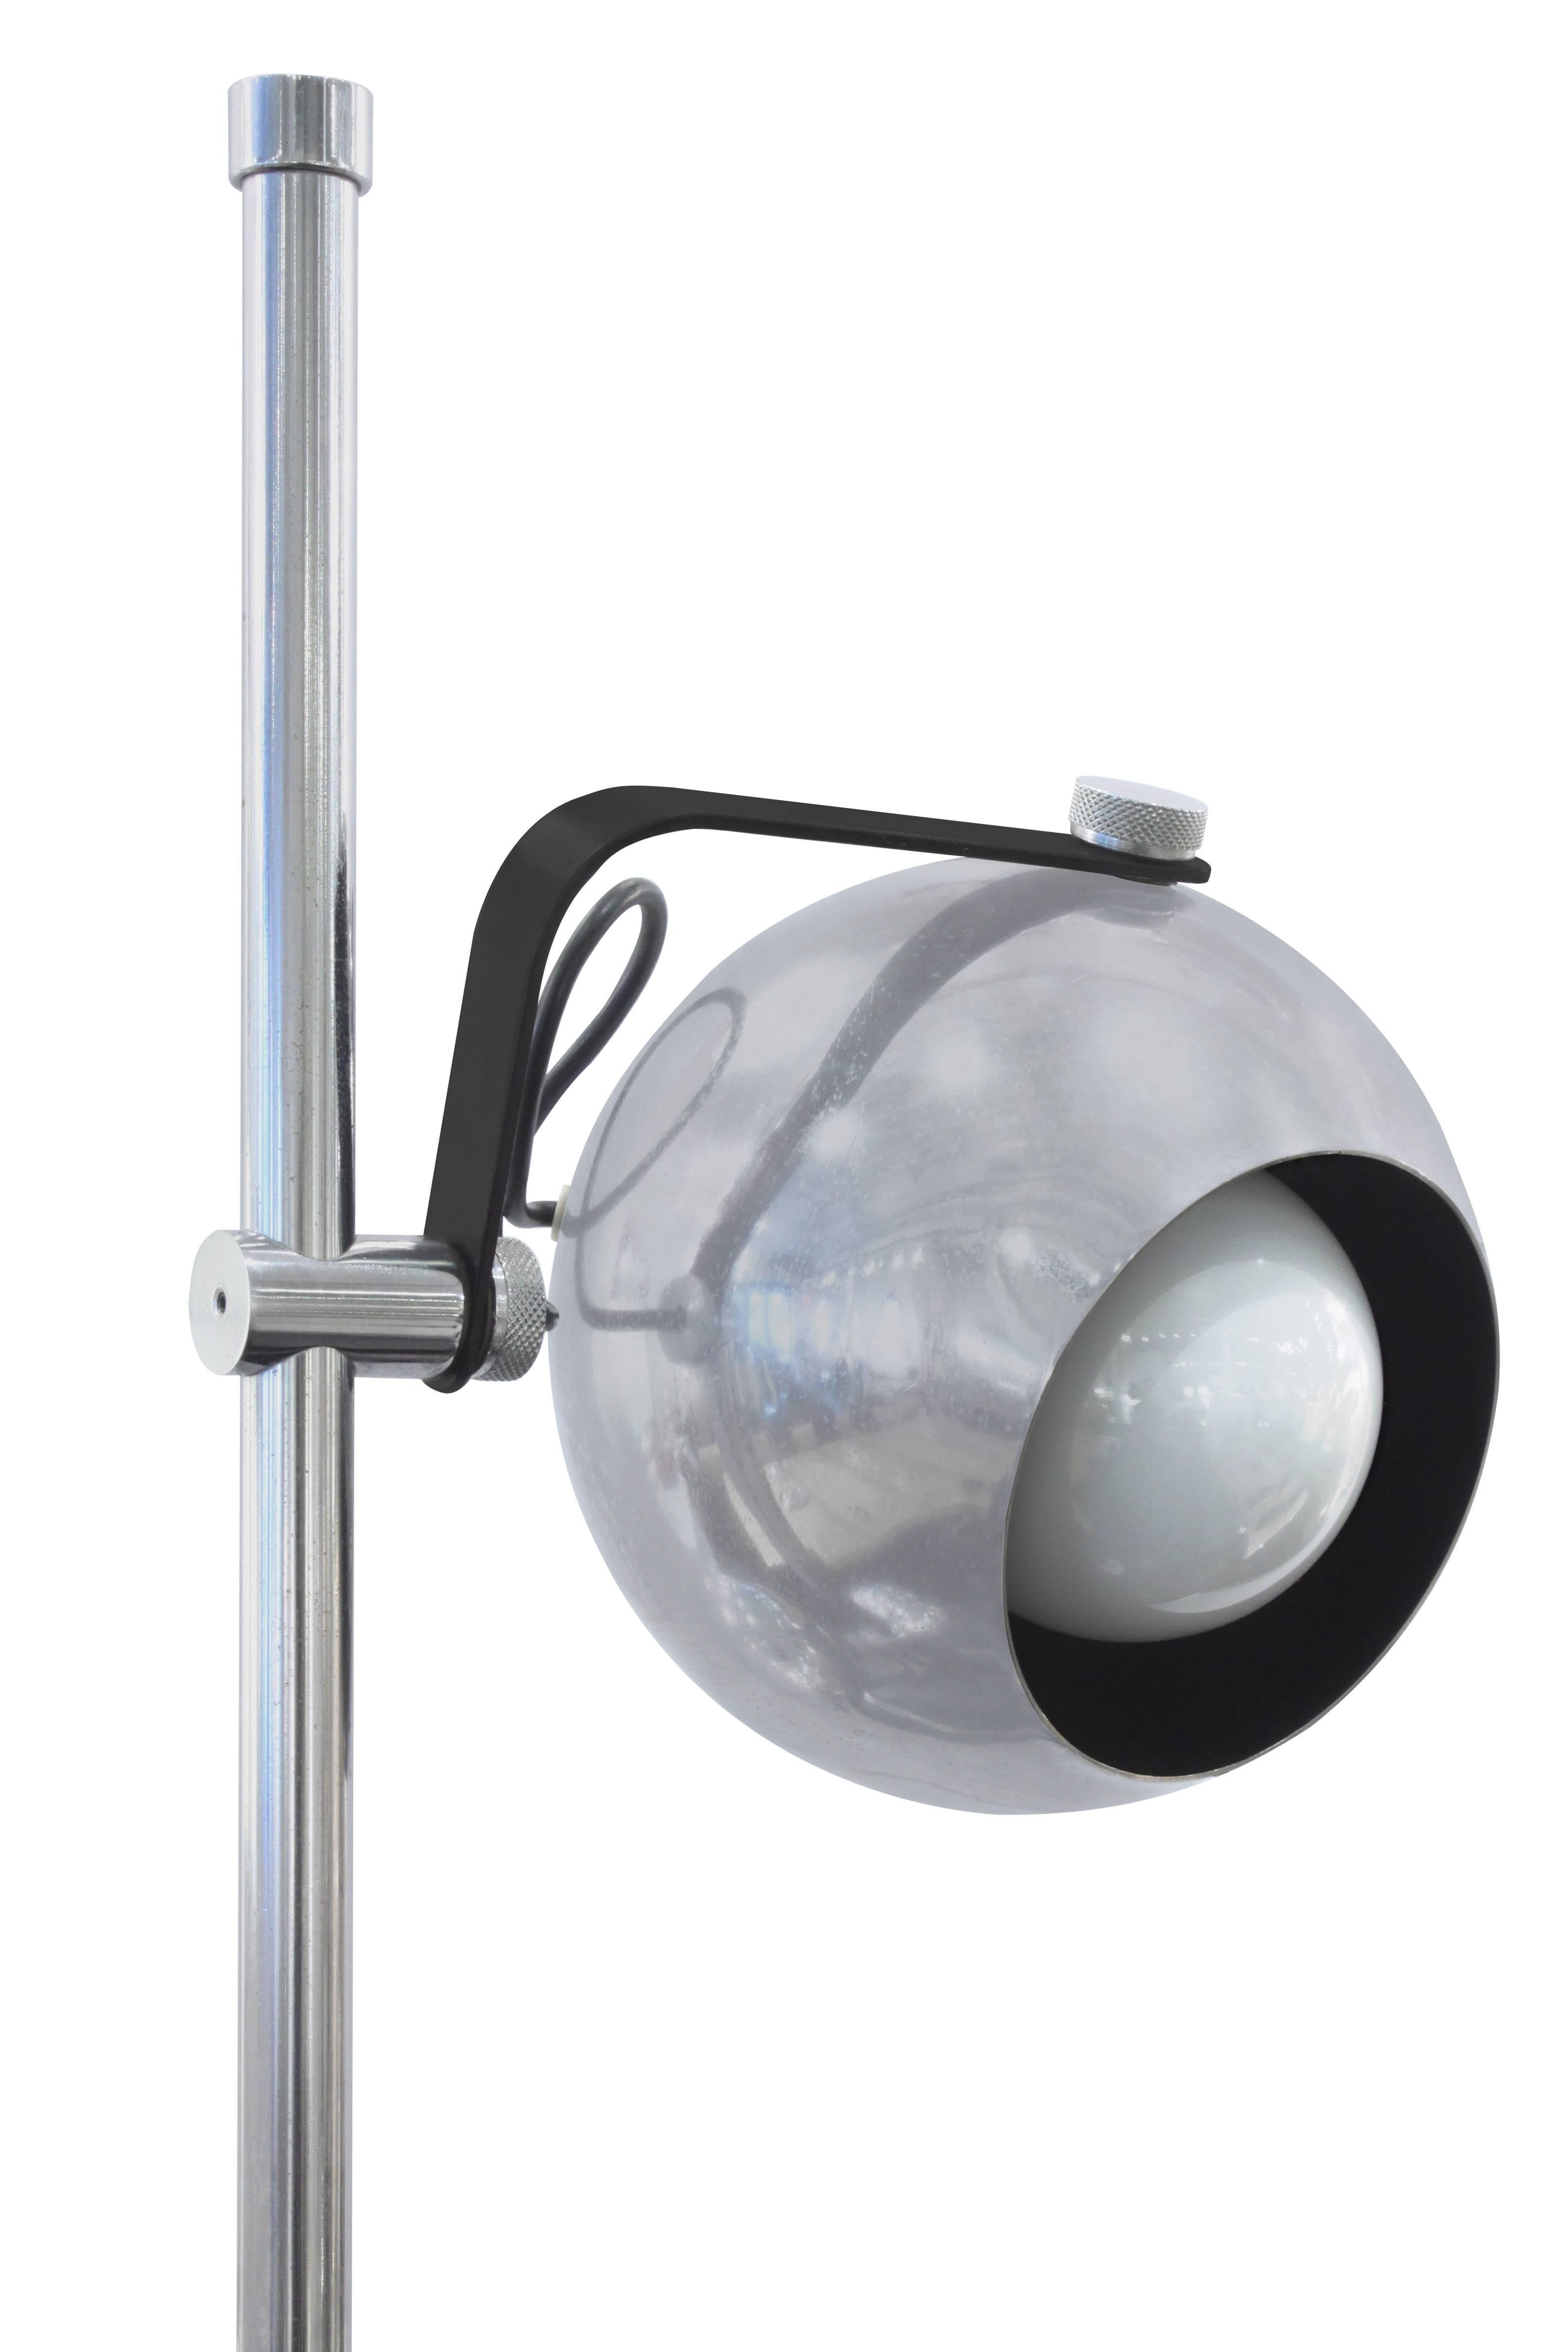 Rare floor lamp with three adjustable chrome spheres and marble base by 
Arredoluce, Italy, 1960s (signed "Made in Italy" on base).
 